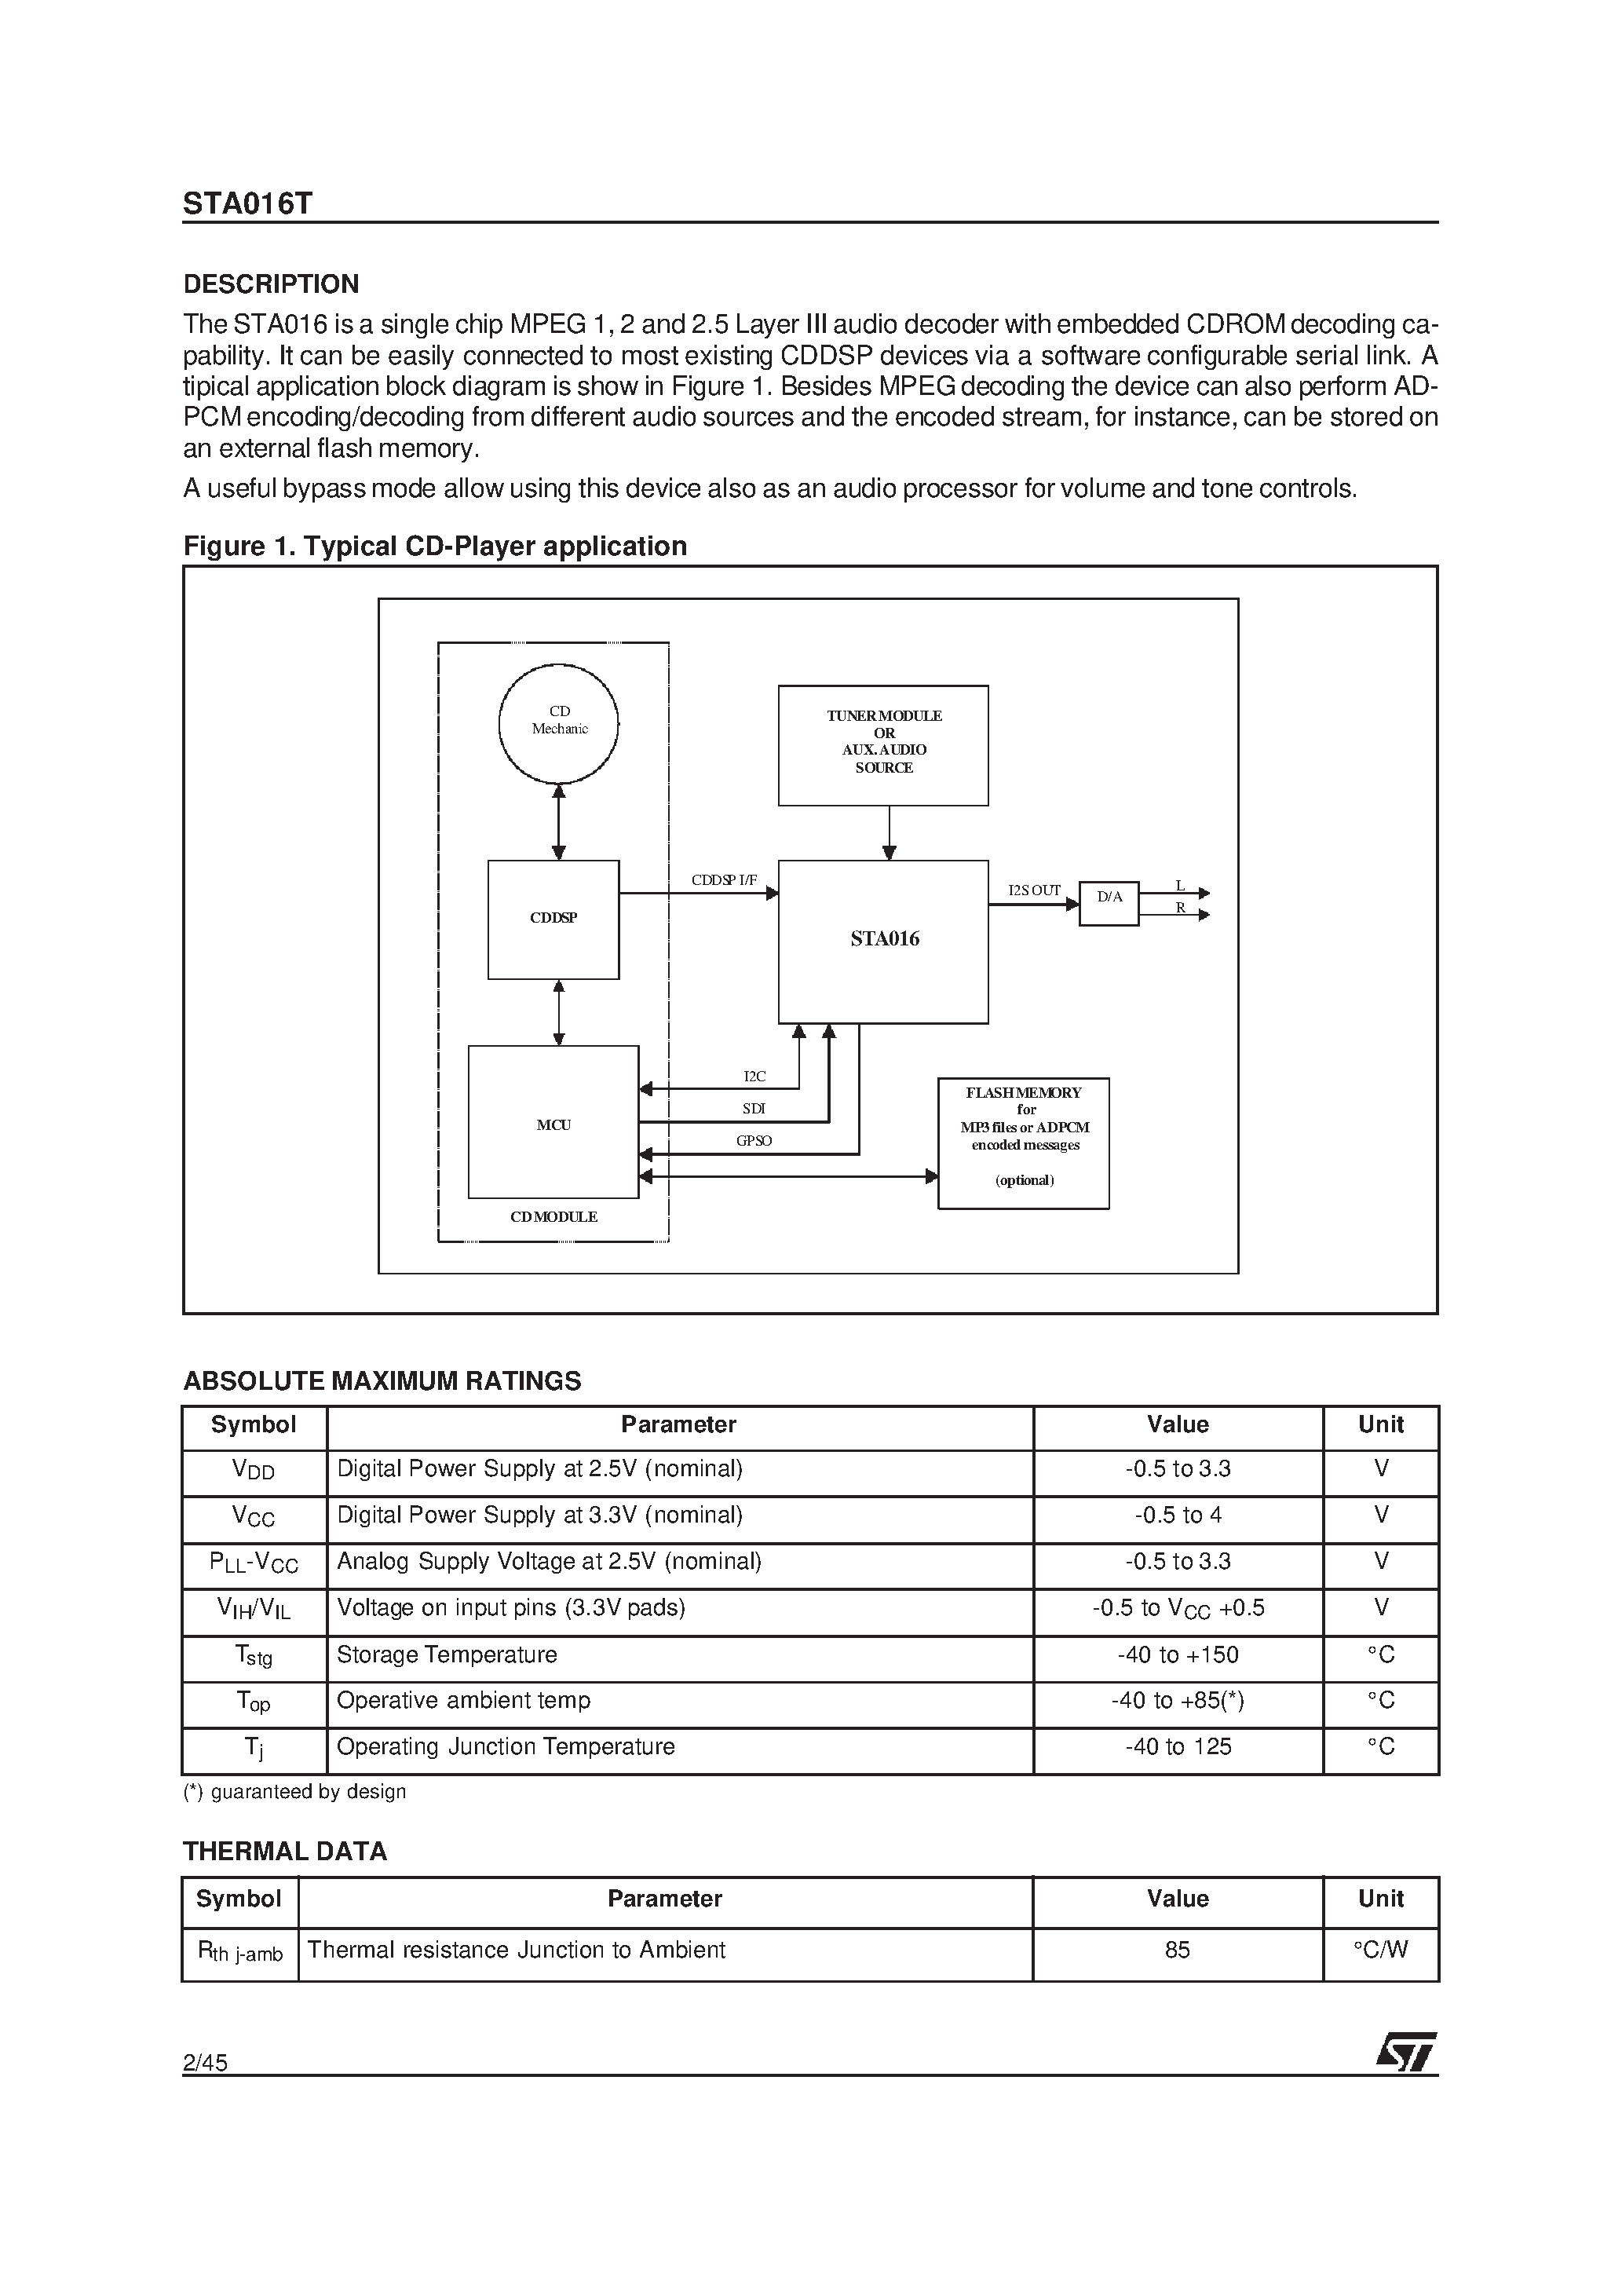 Datasheet STA016T - MPEG 2.5 LAYER III AUDIO DECODER SUPPORTING CD-ROM CAPABILITY & ADPCM page 2